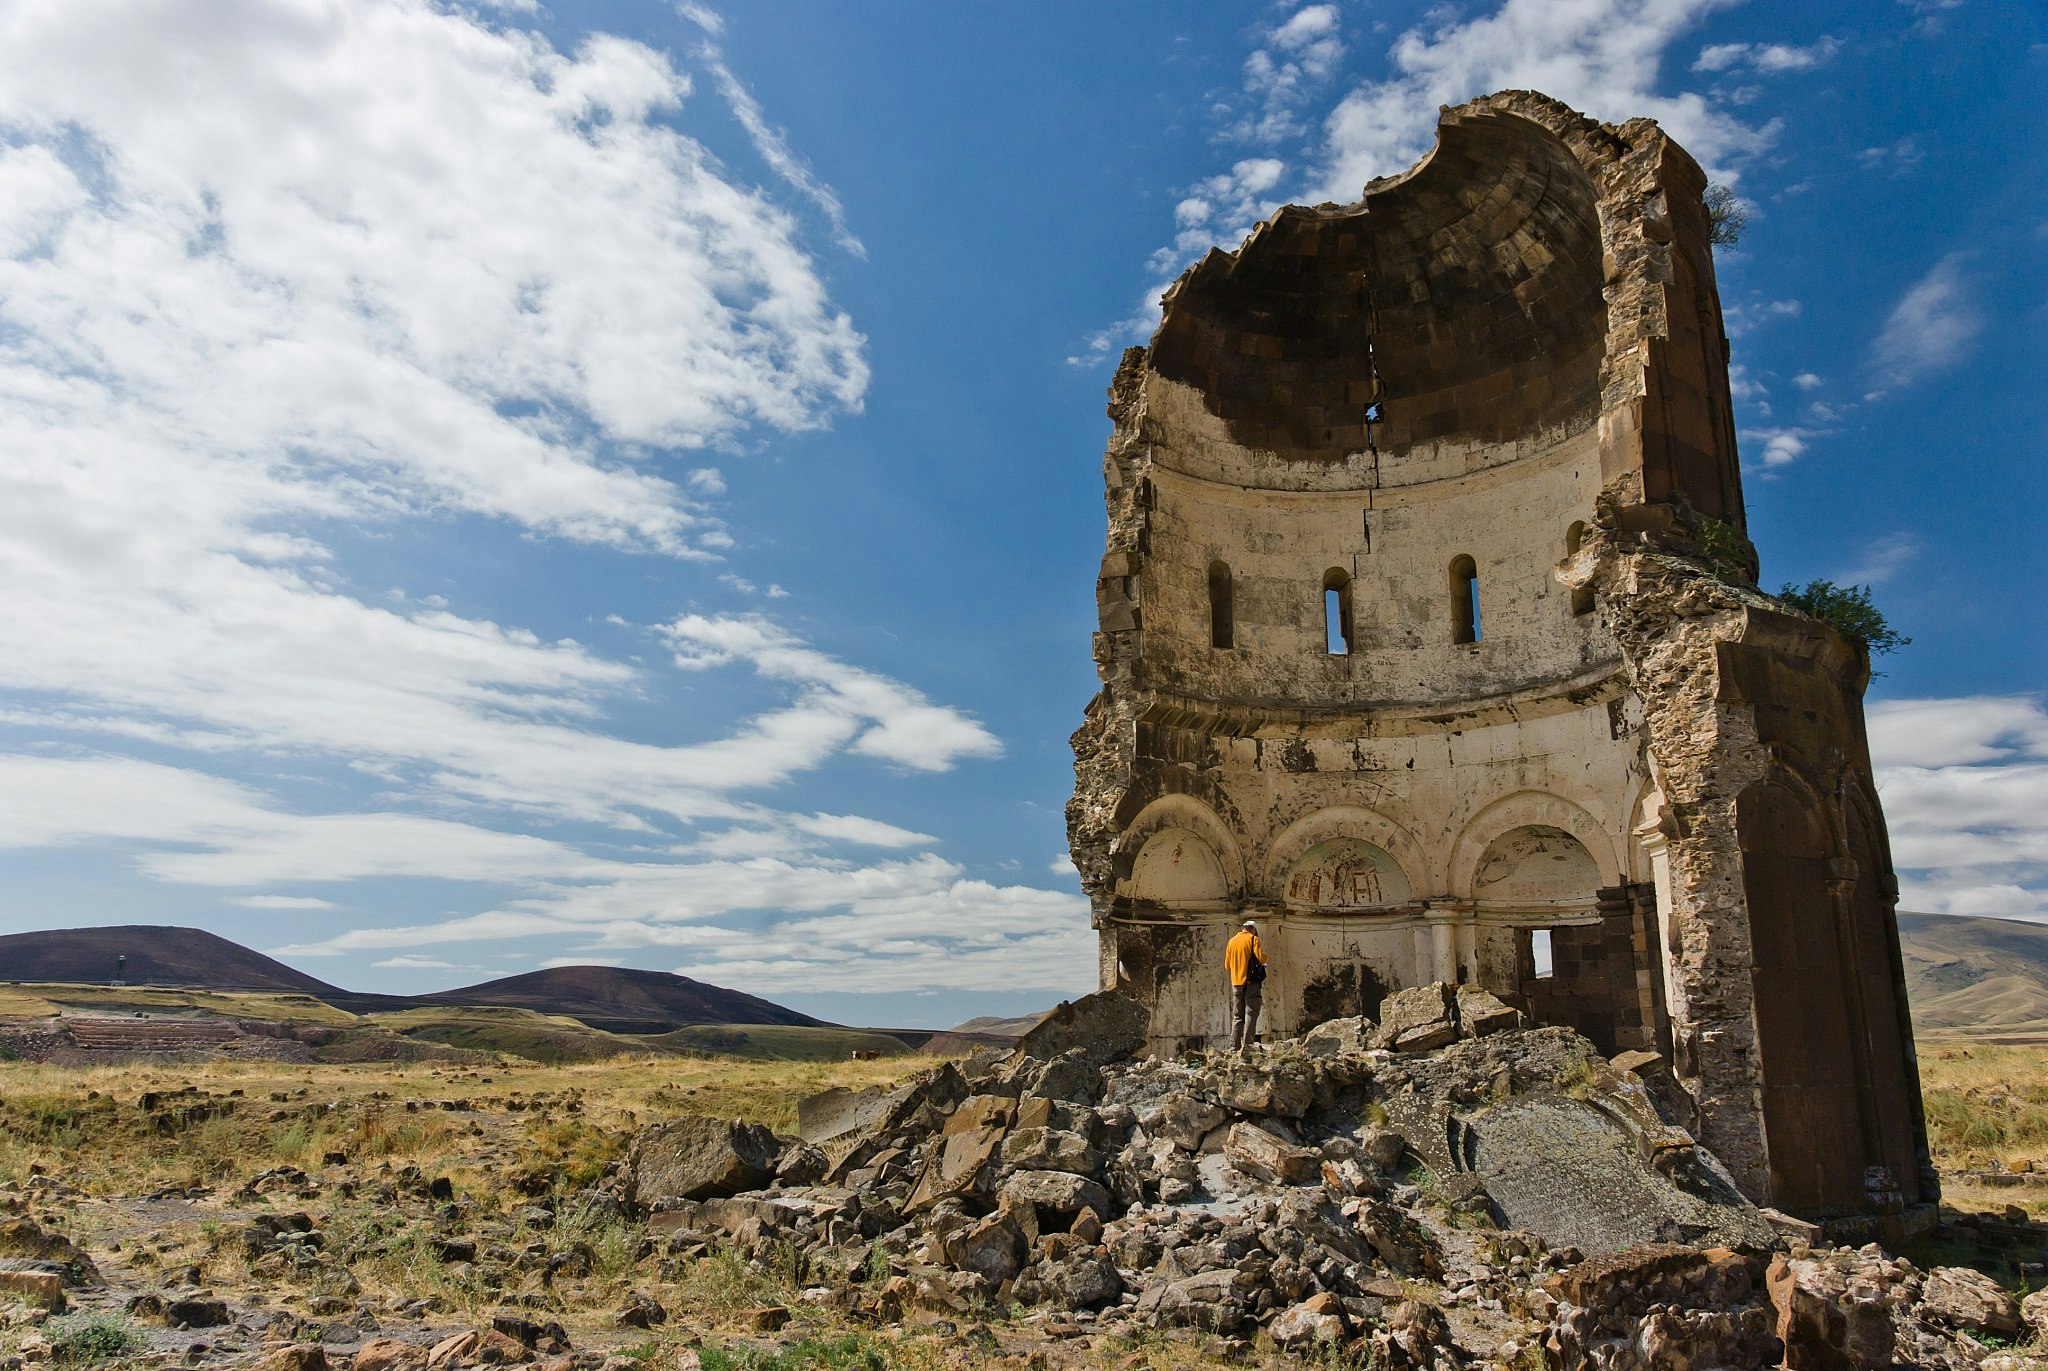 A person stands on a pile of rubble looking inside the remains of a half-destroyed domed church, with a grassy plain and hills in the background.